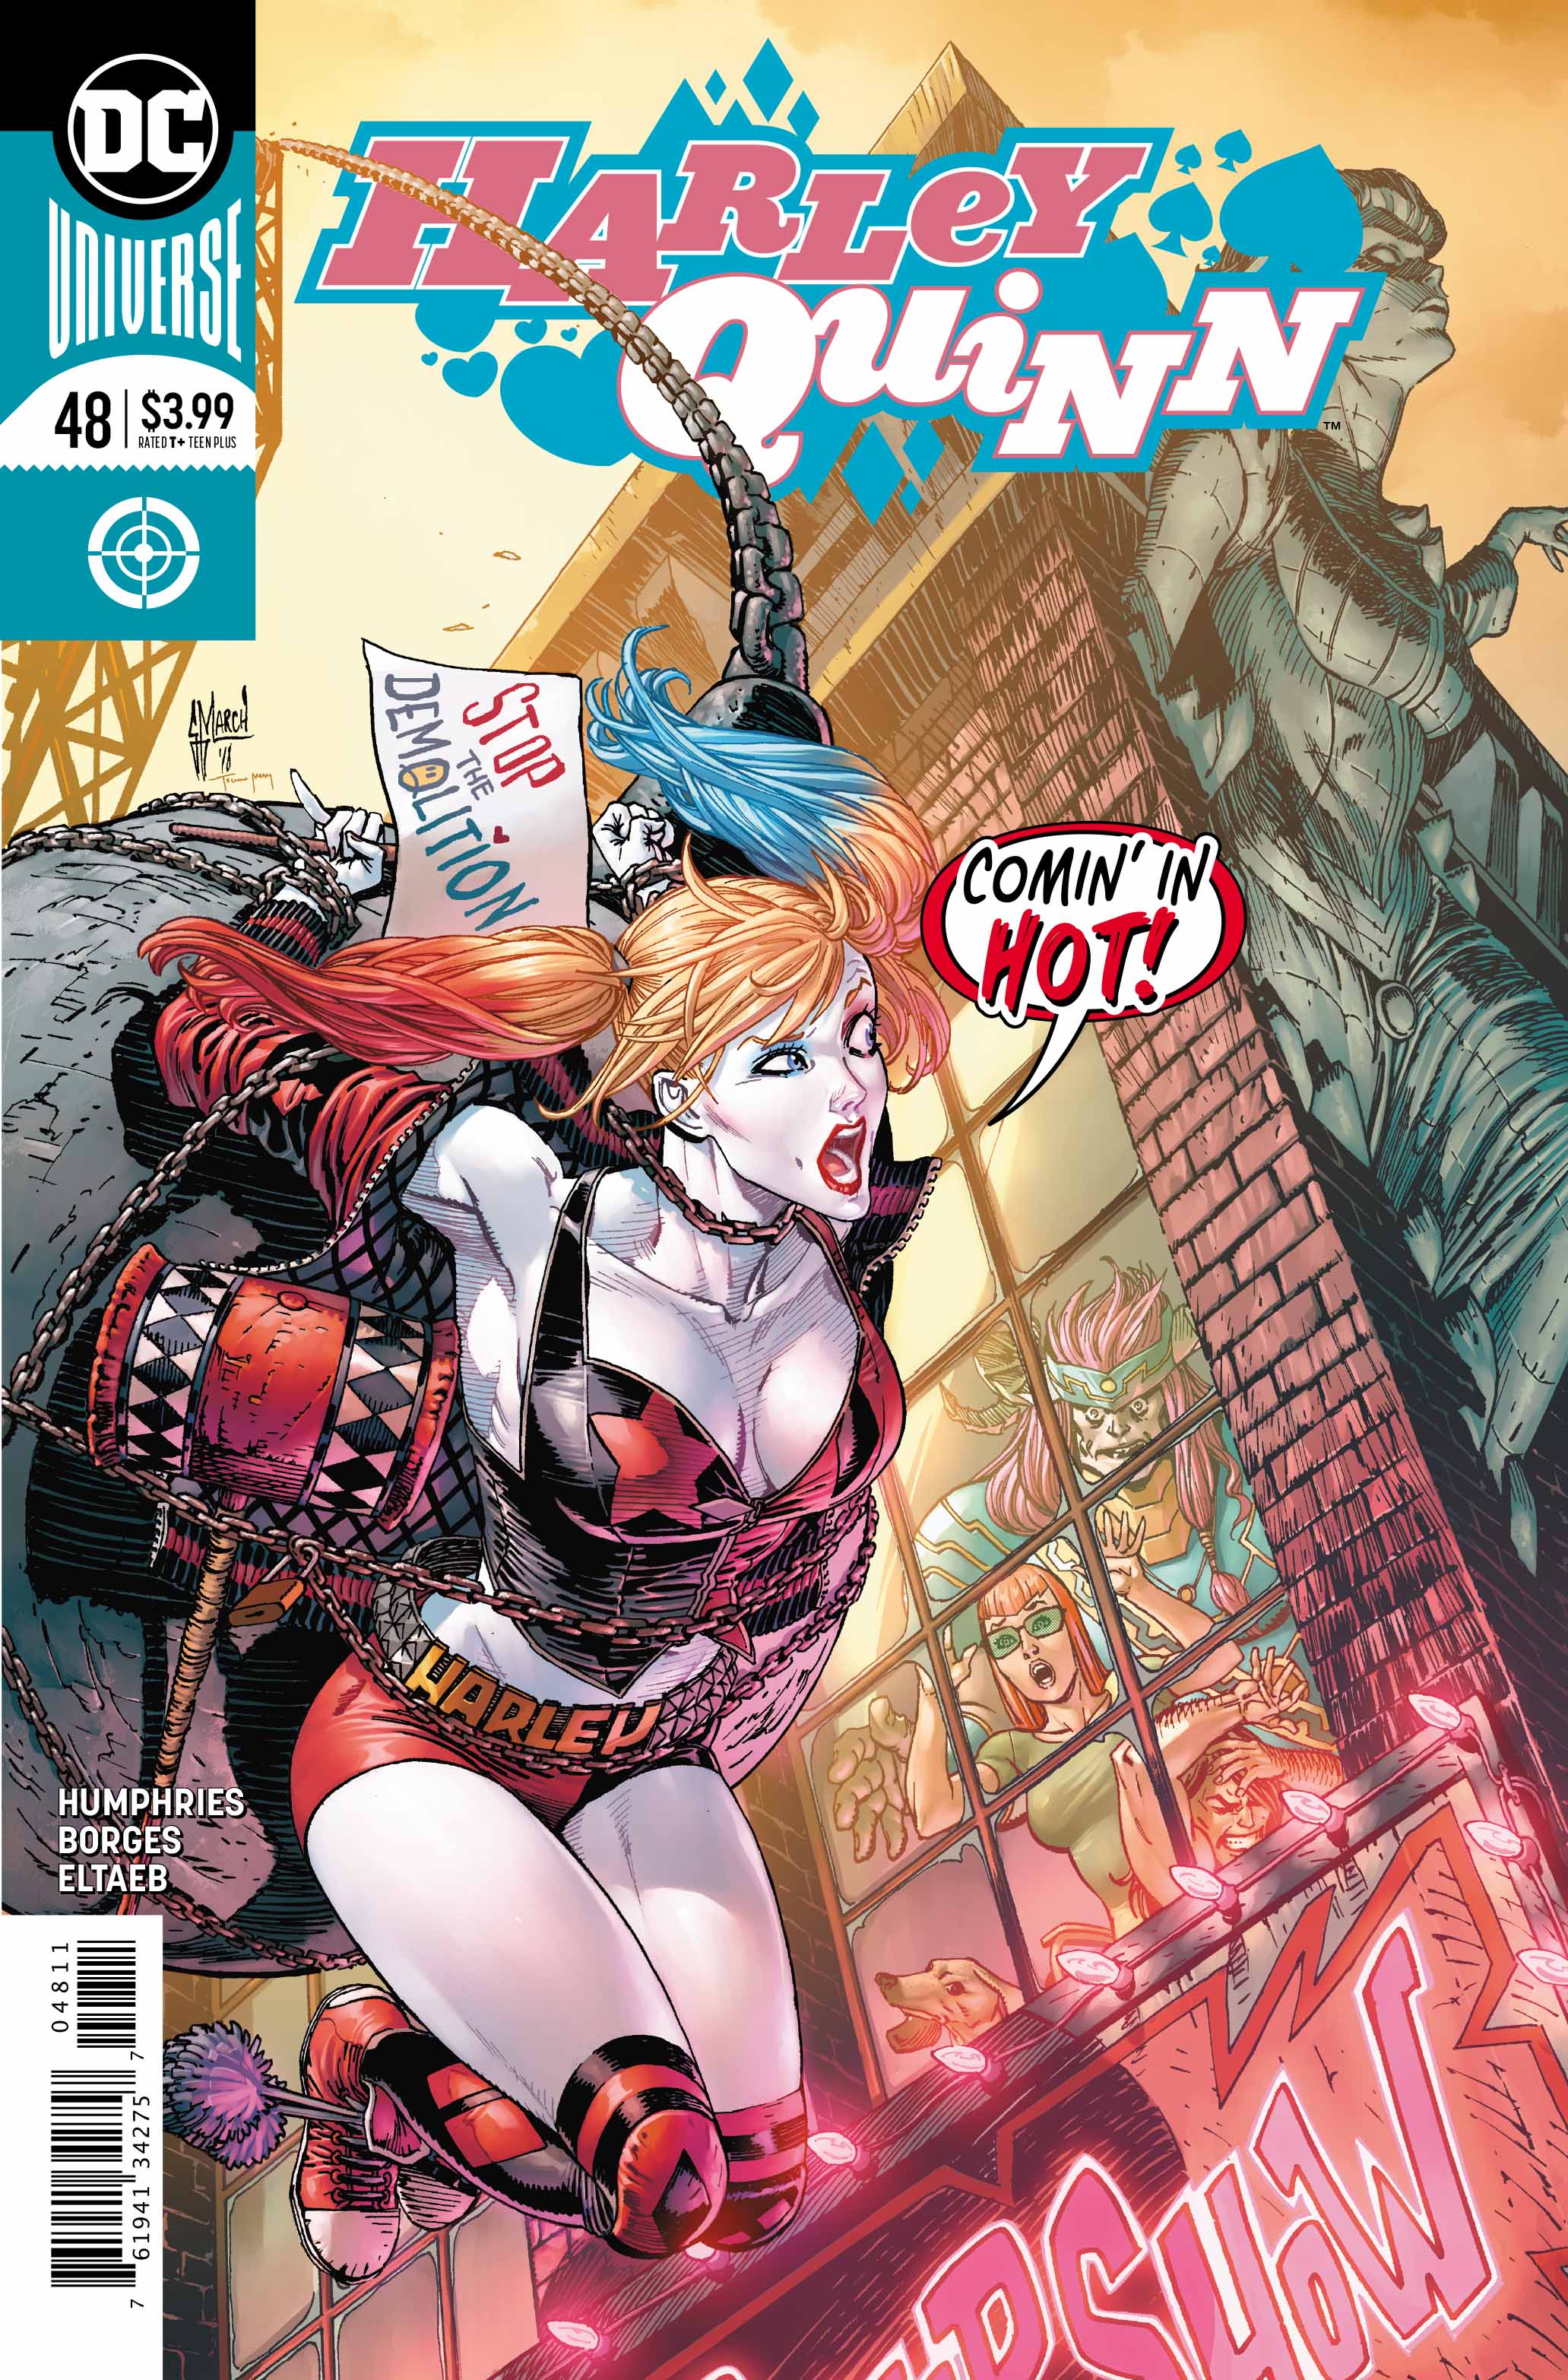 Talking all things Harley Quinn and the upcoming issue #50 spectacular with writer Sam Humphries